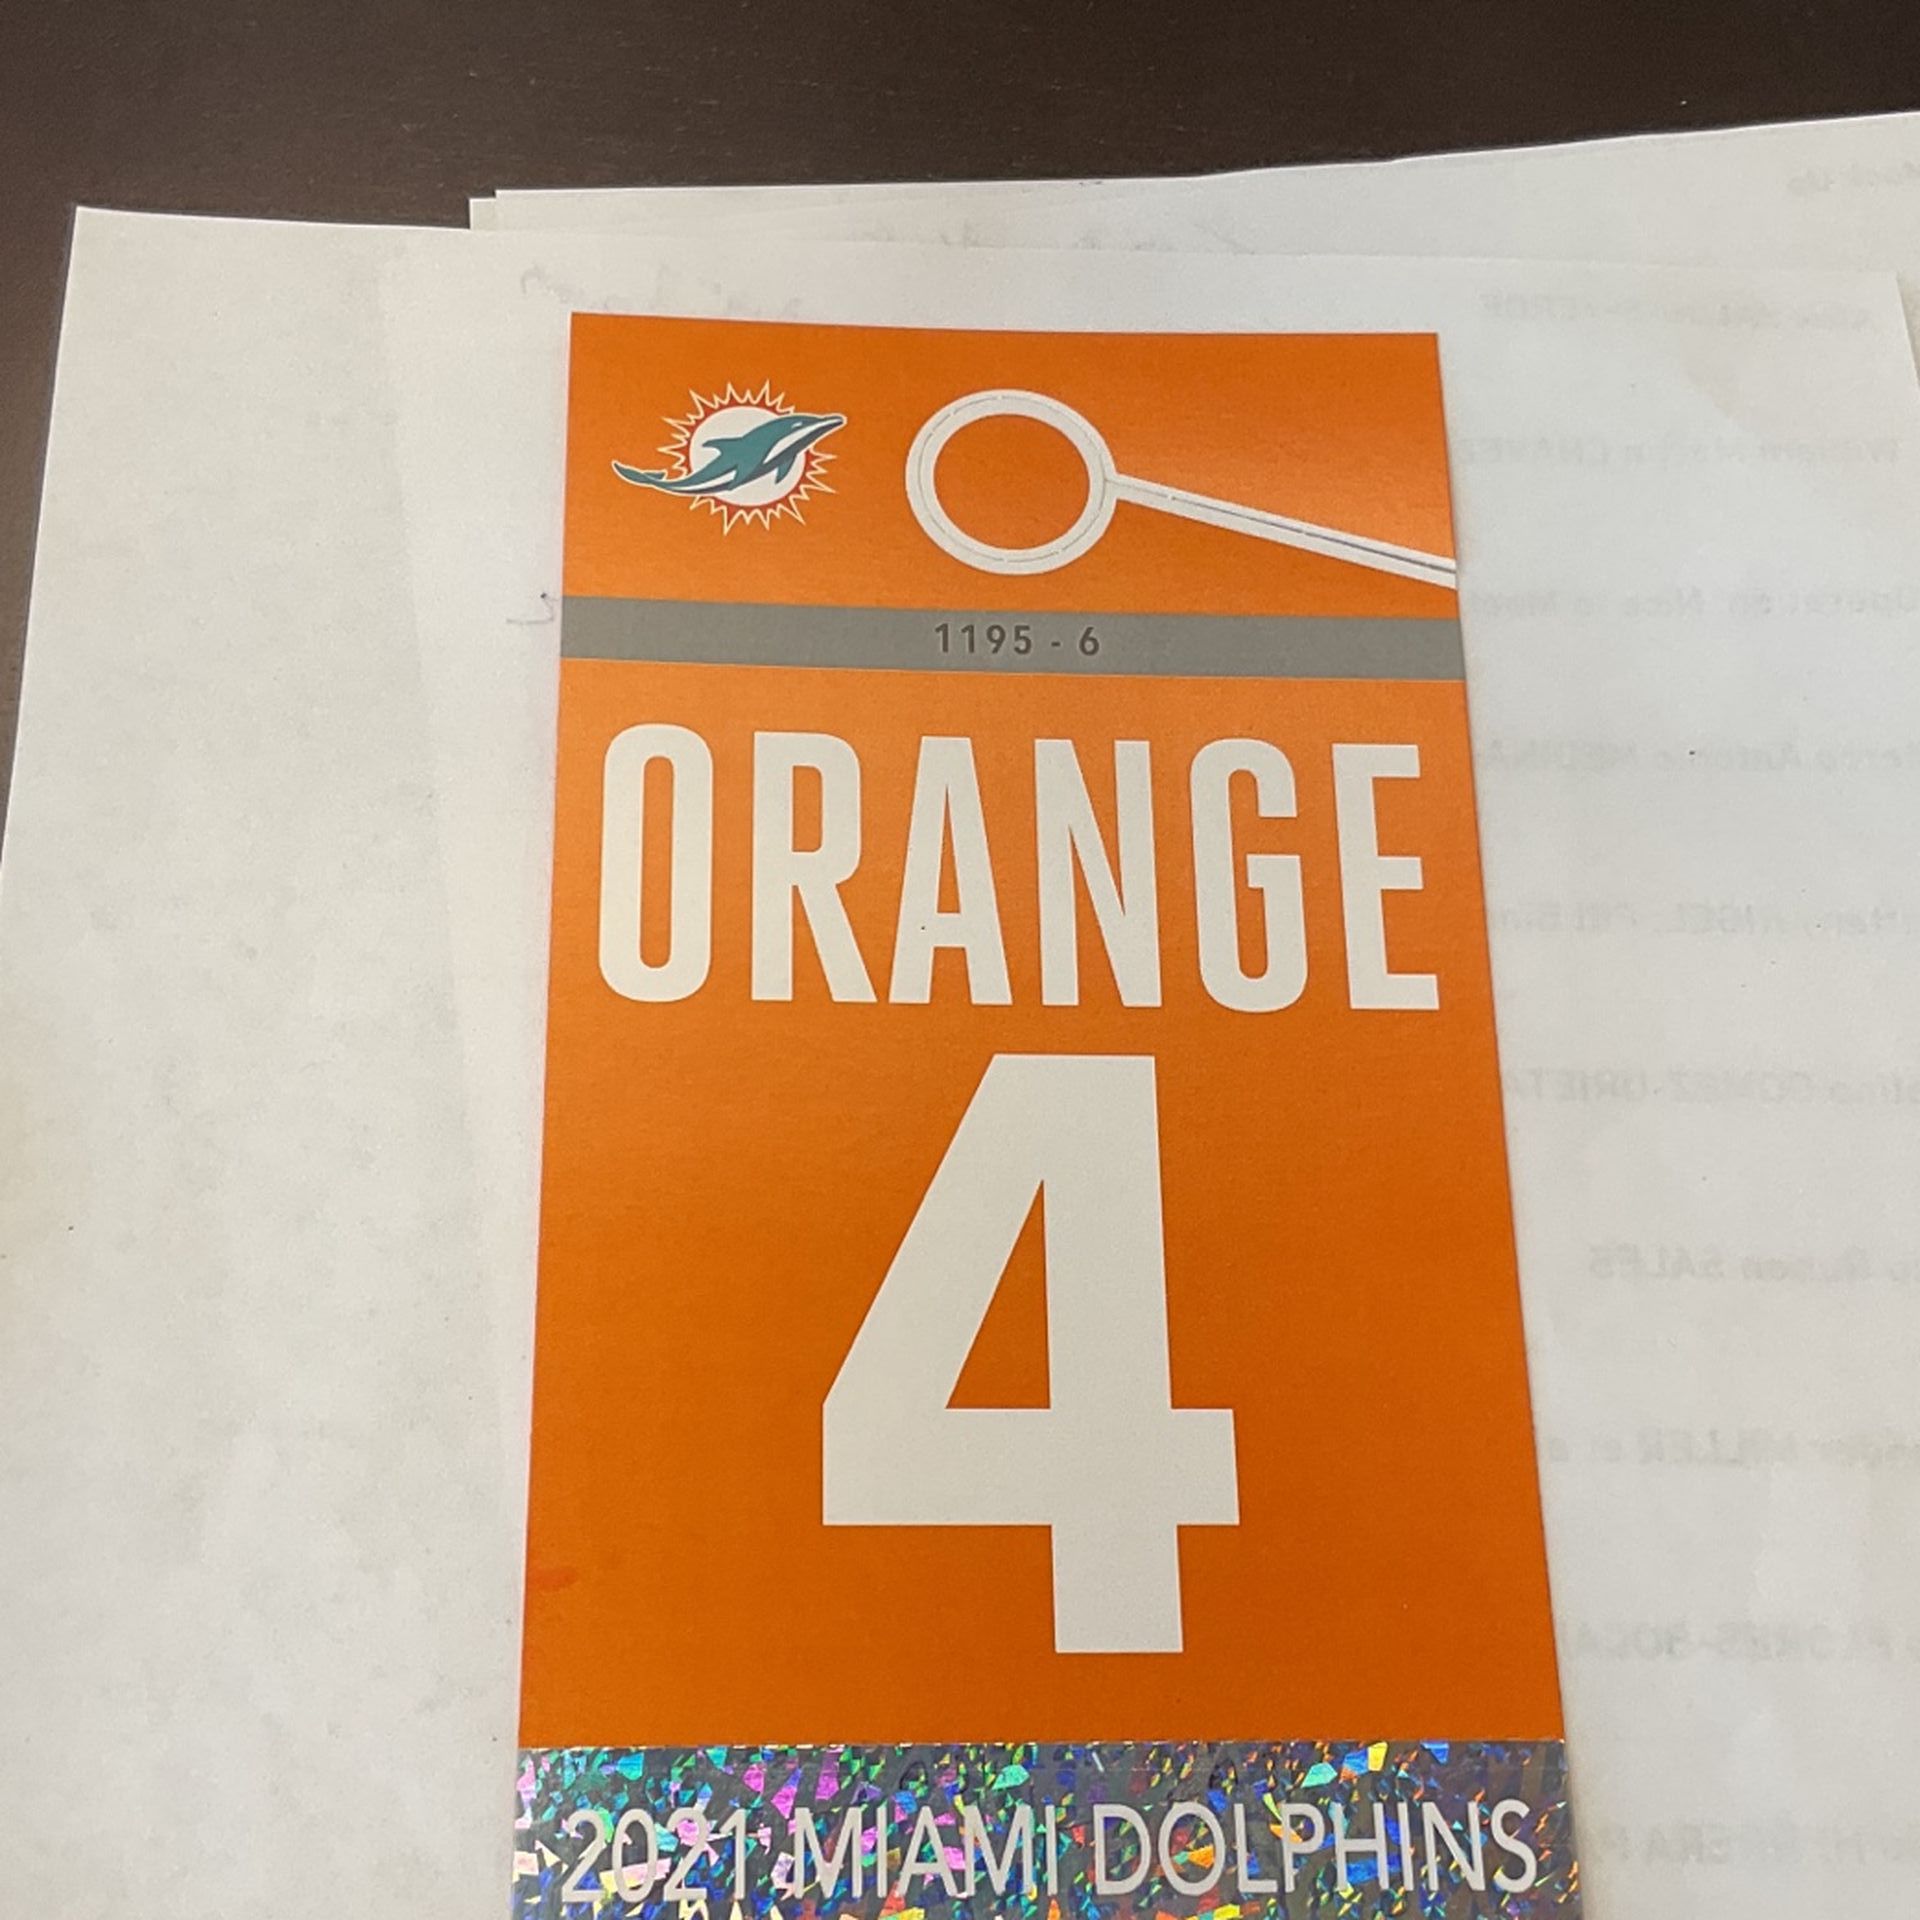 Orange Parking Pass For Dolphins Vs Falcons 